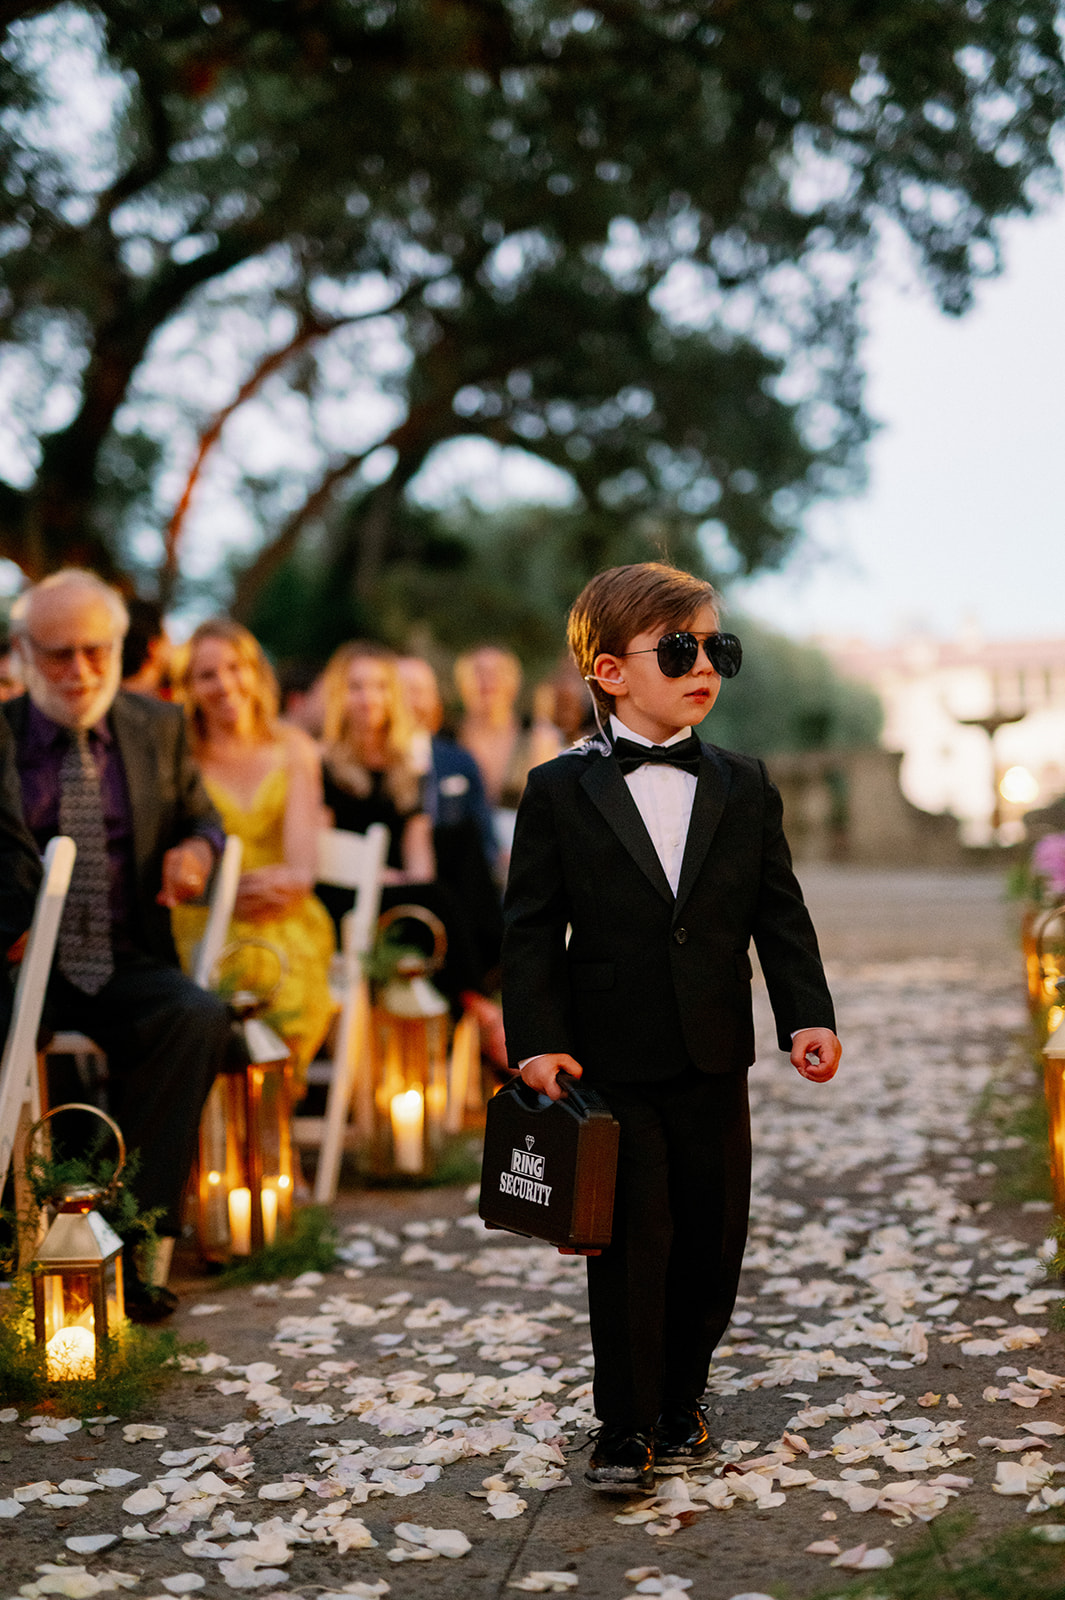 Ring bearer dressed as a security guard.